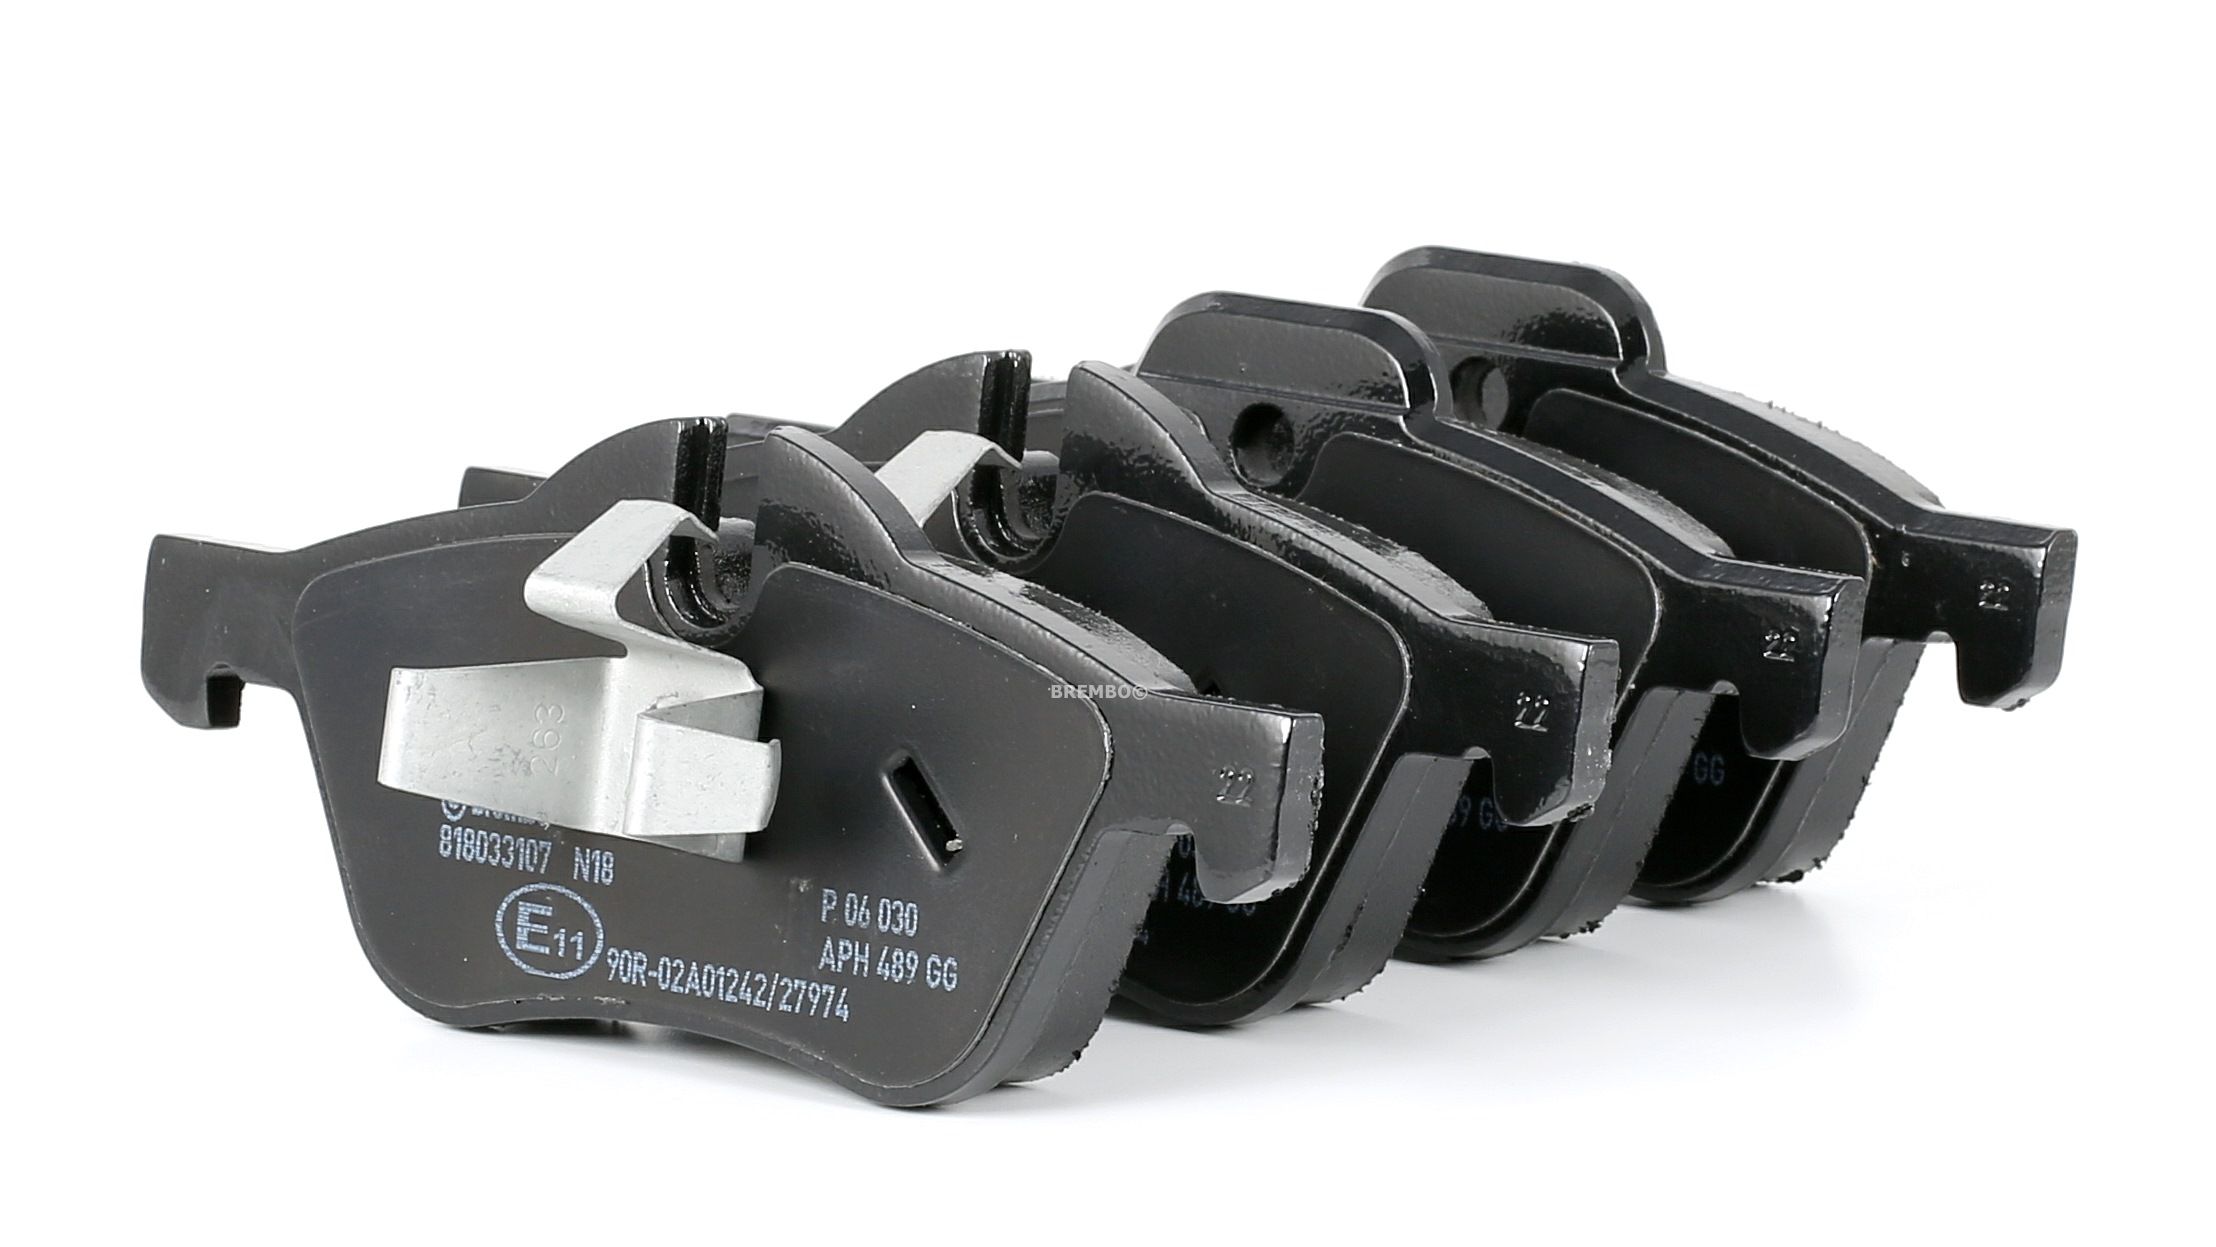 BREMBO P 06 030 Brake pad set prepared for wear indicator, with piston clip, without accessories